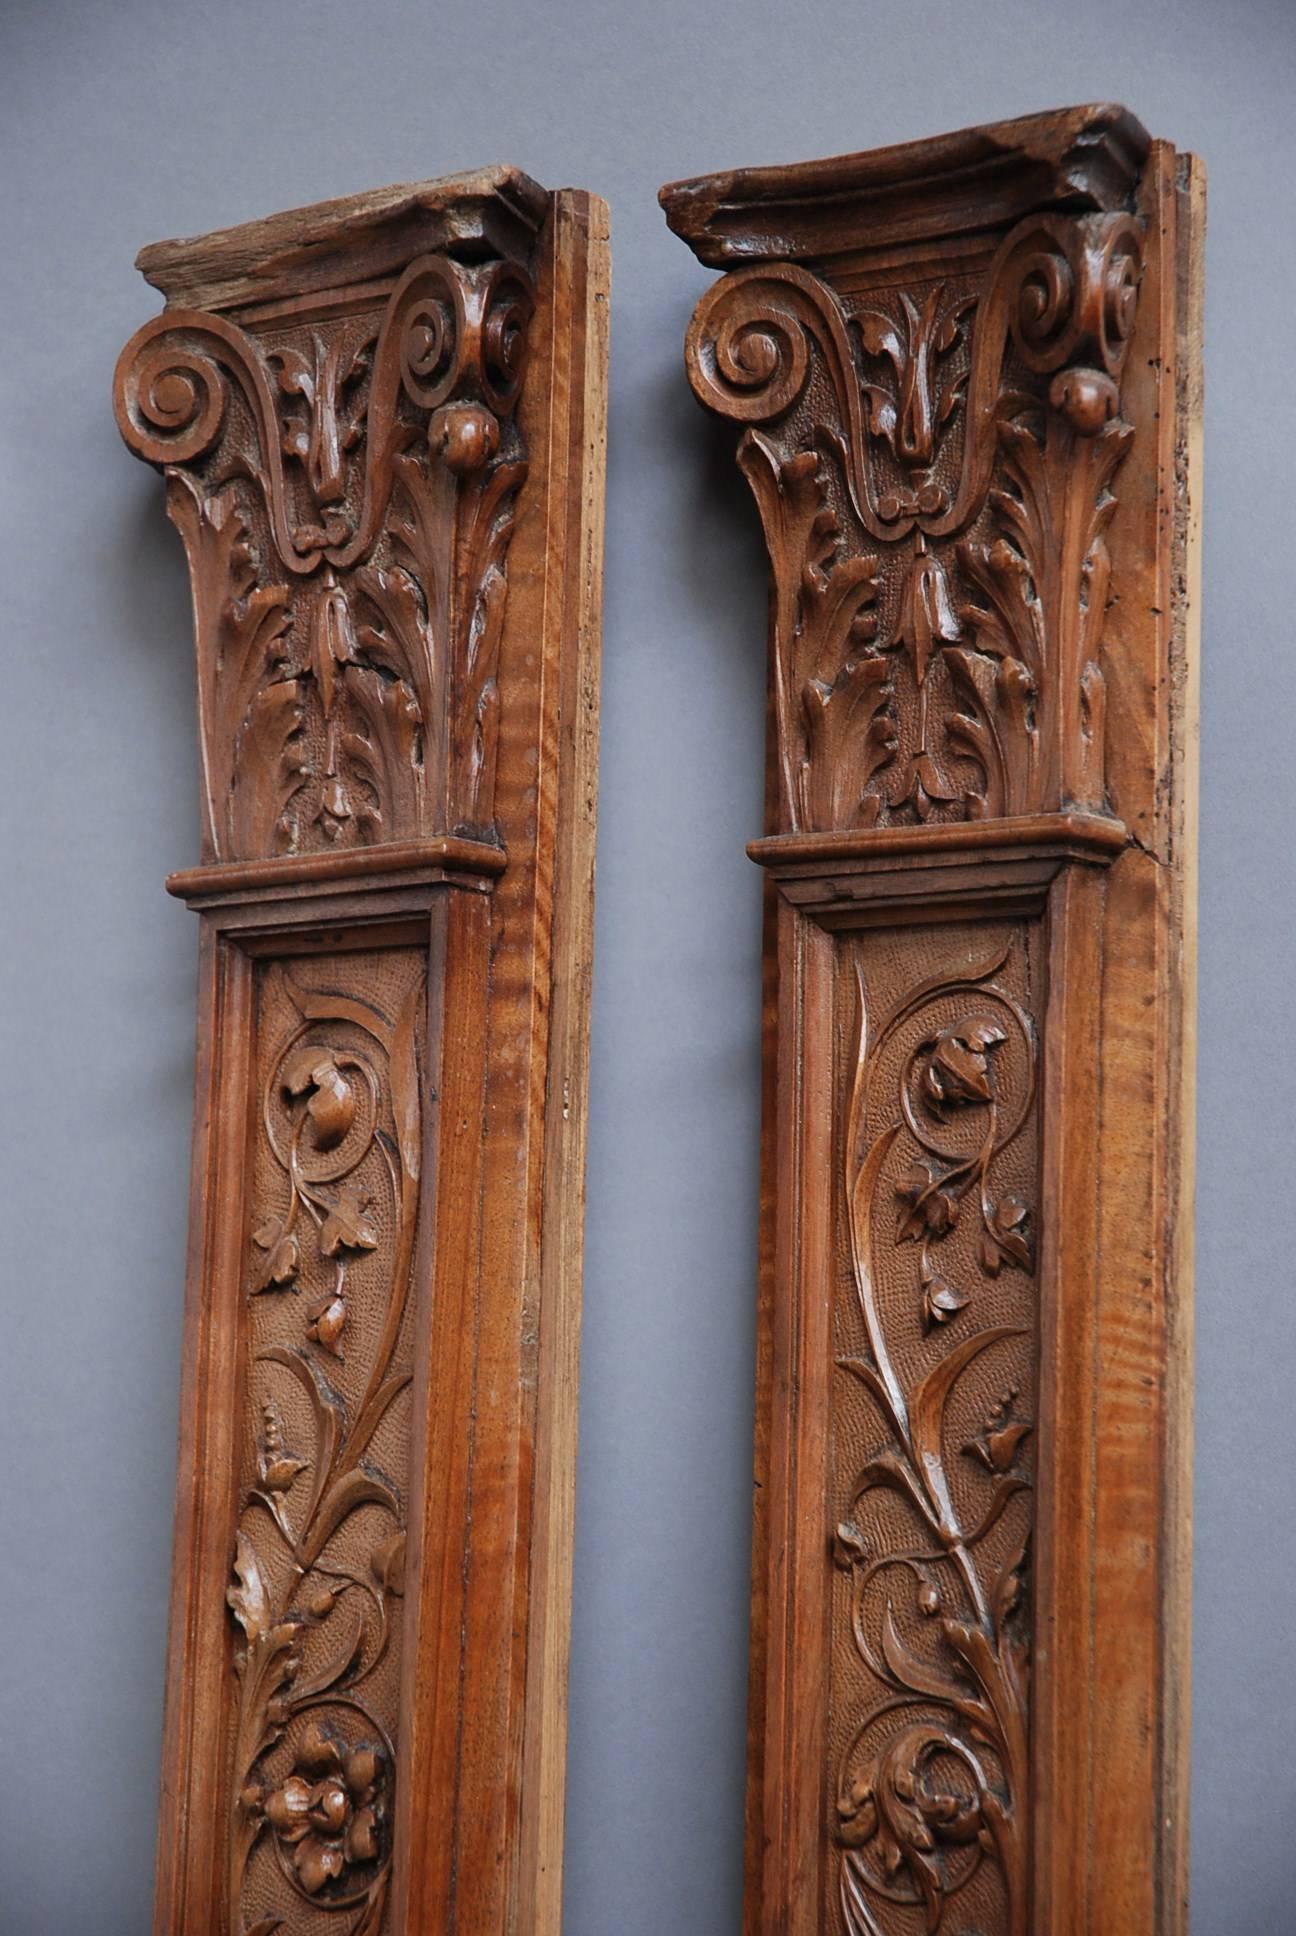 A pair of late 19th century Continental carved walnut pilasters in the Classical form, possibly French or Italian.

The pilasters consist of Corinthian style capitals to the top with carved scrolling floral and foliate designs.

This leads down